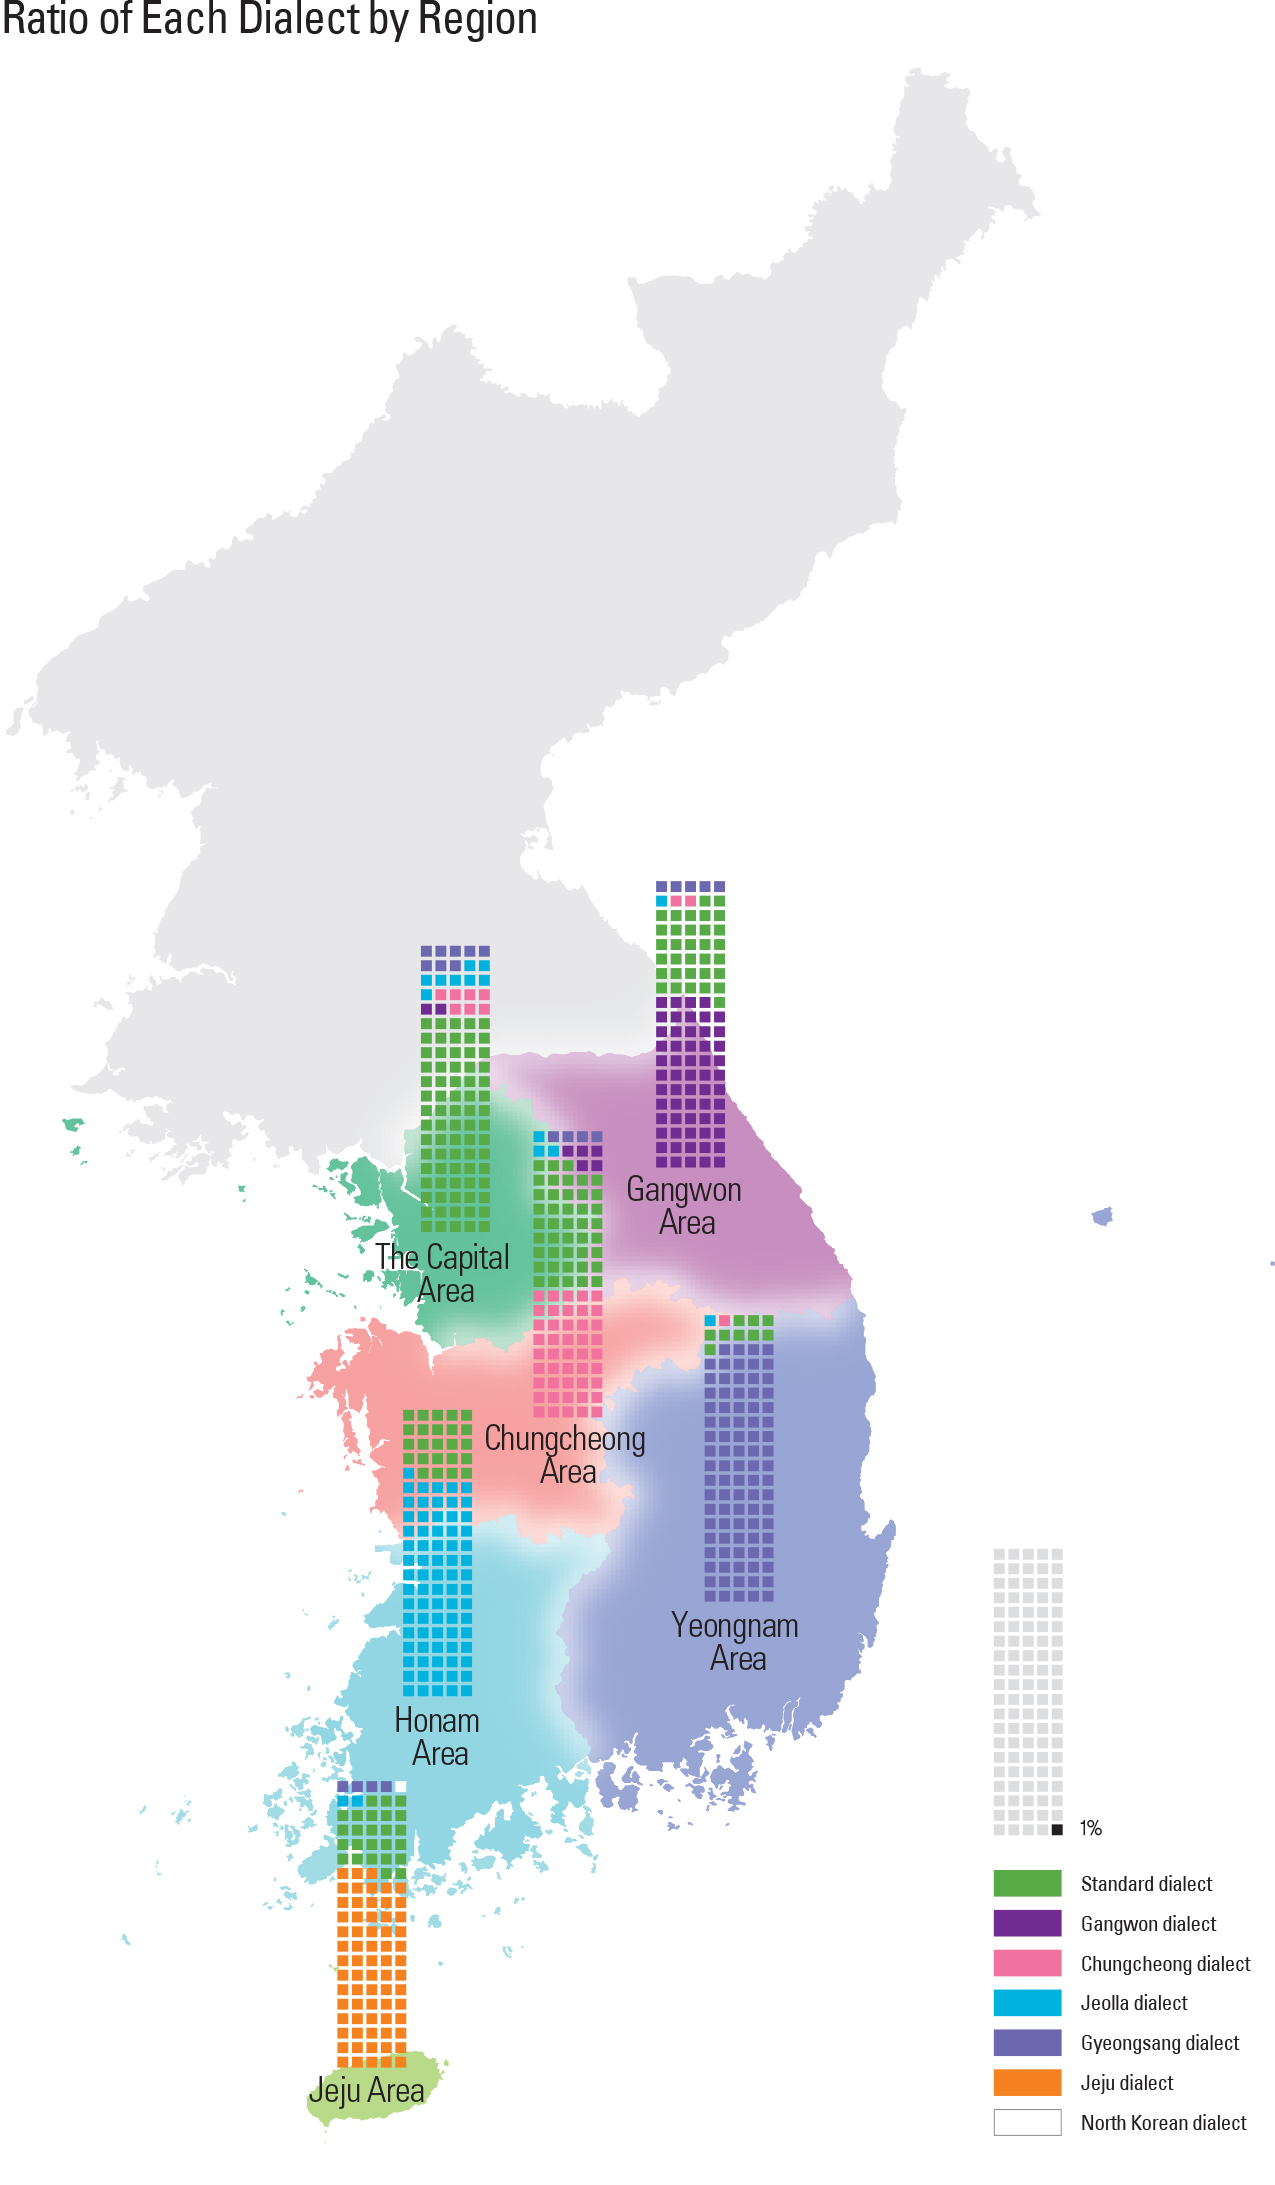  Ratio of Each Dialect by Region